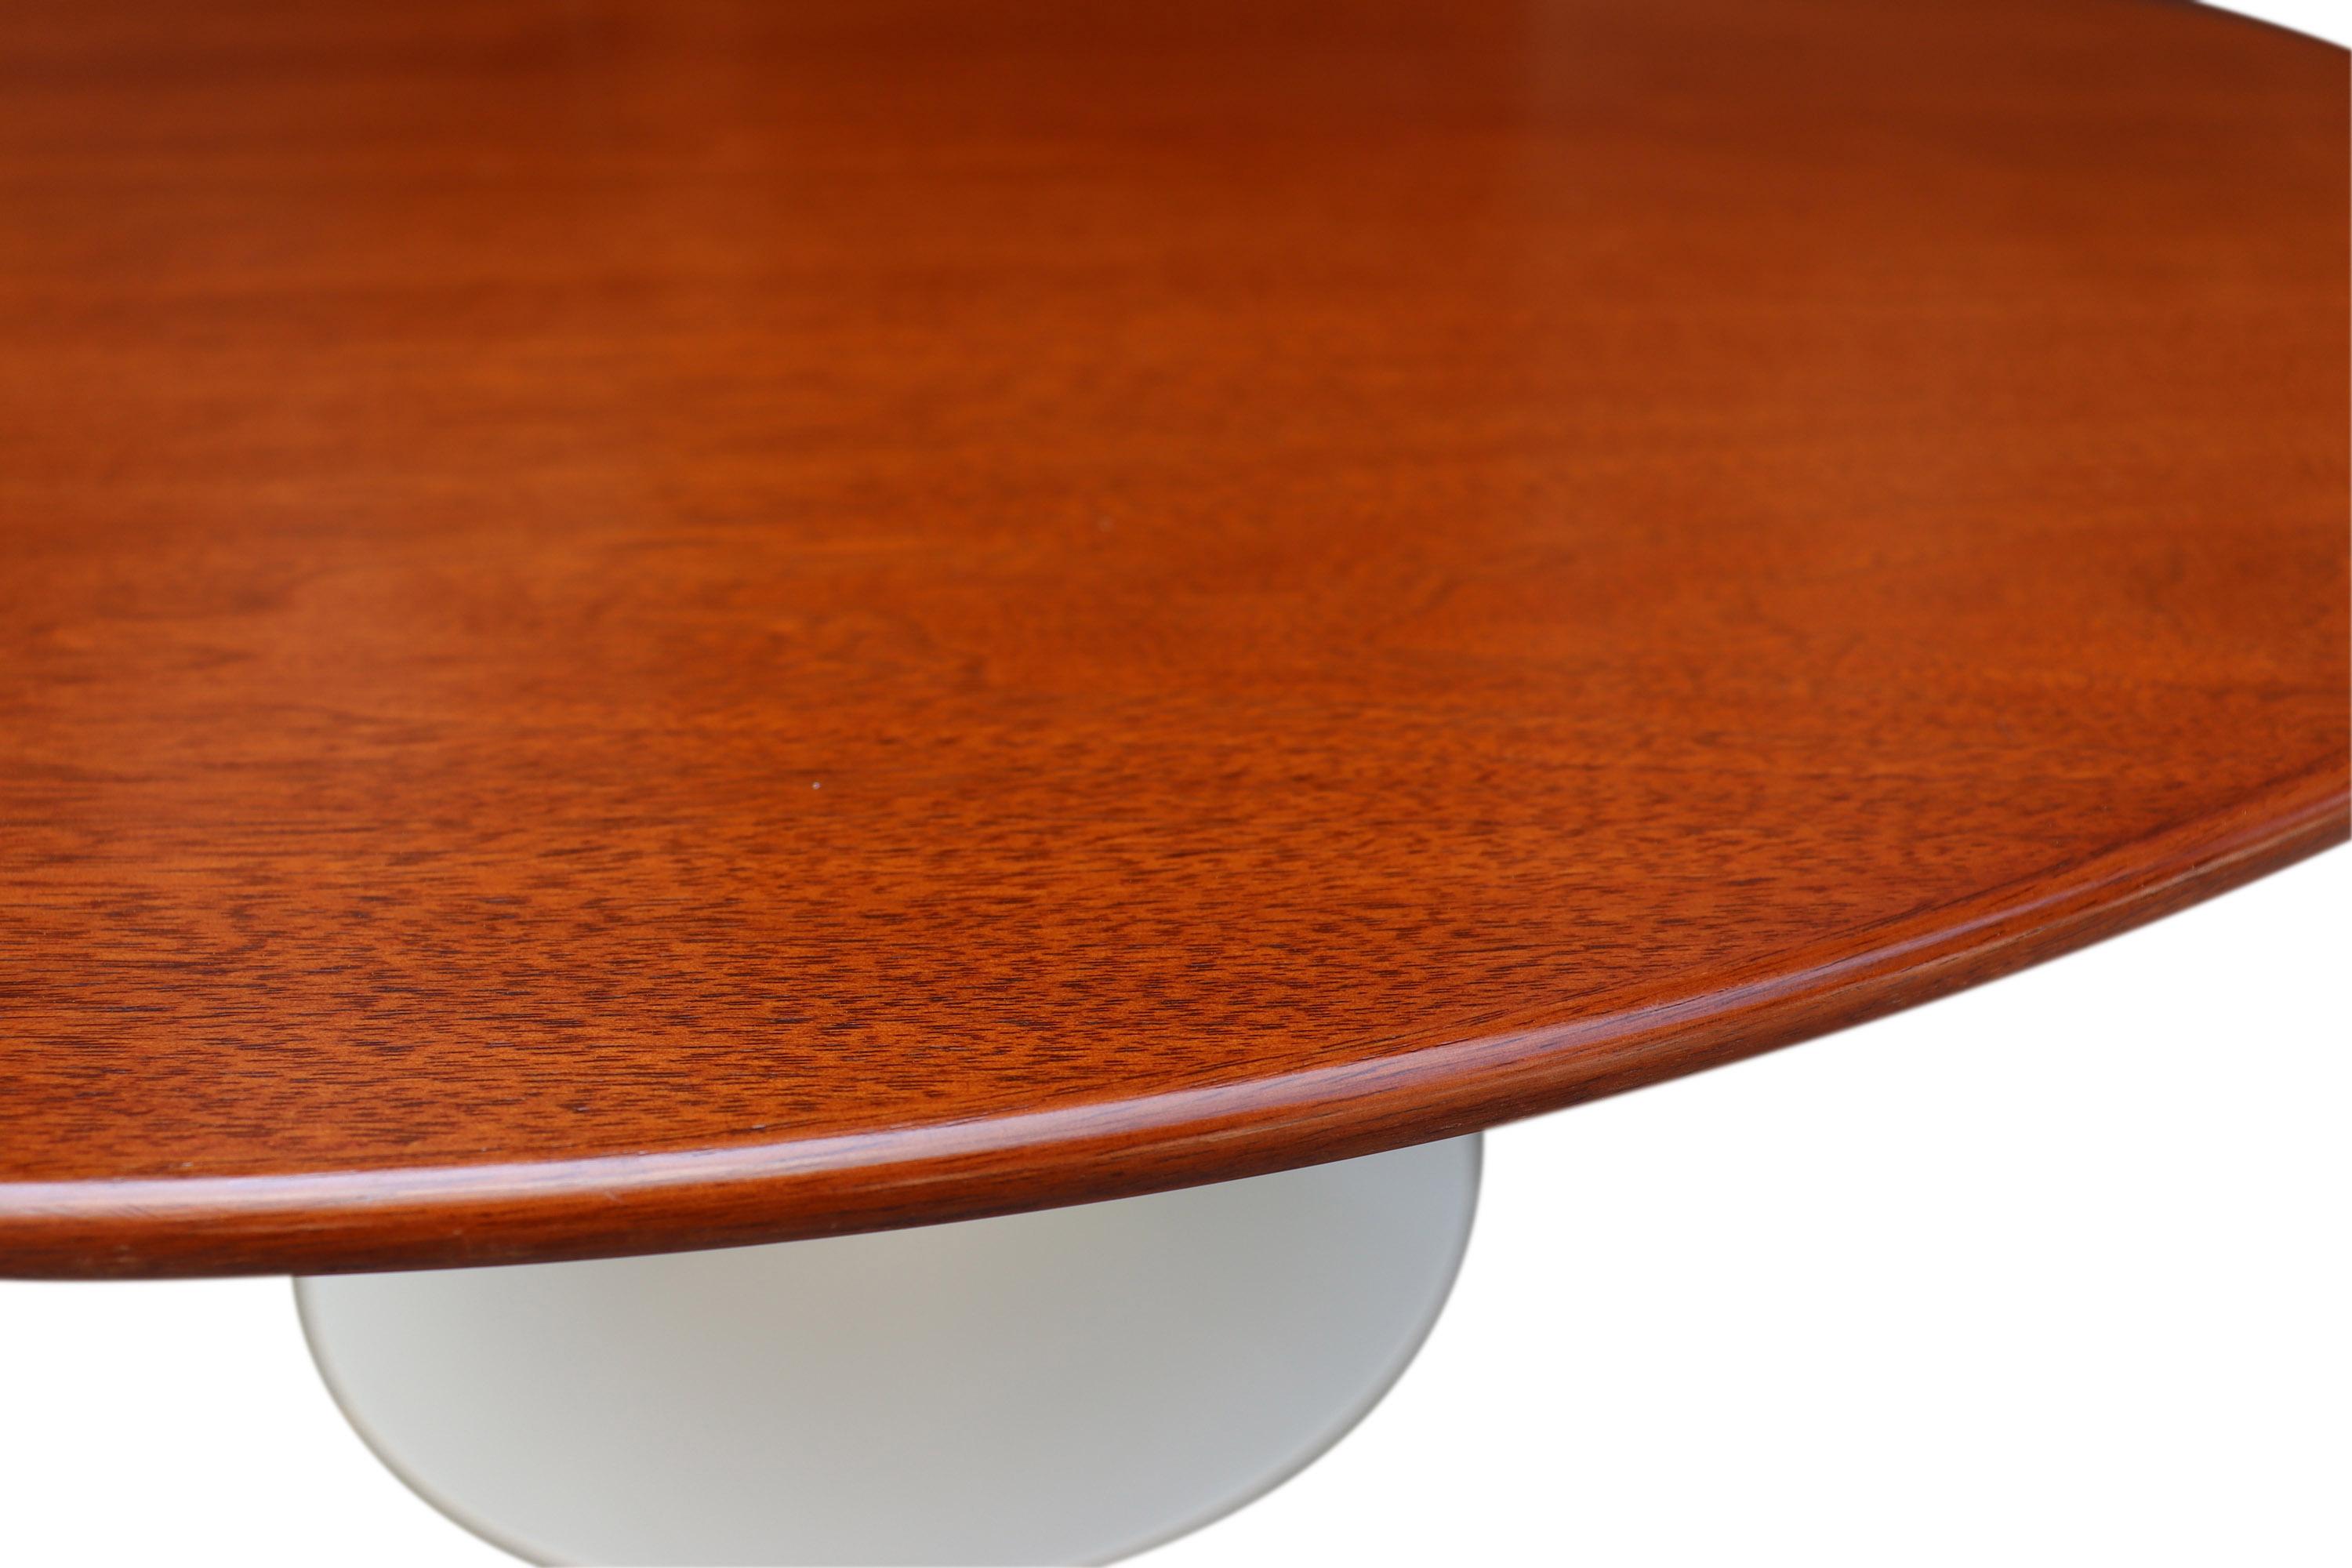 For your consideration is a striking example of Mid-Century Modern design, an Eero Saarinen for Knoll cocktail tulip coffee table. The table is circular. 

This iconic design is typical of Saarinen's graceful and organic style. The tulip series